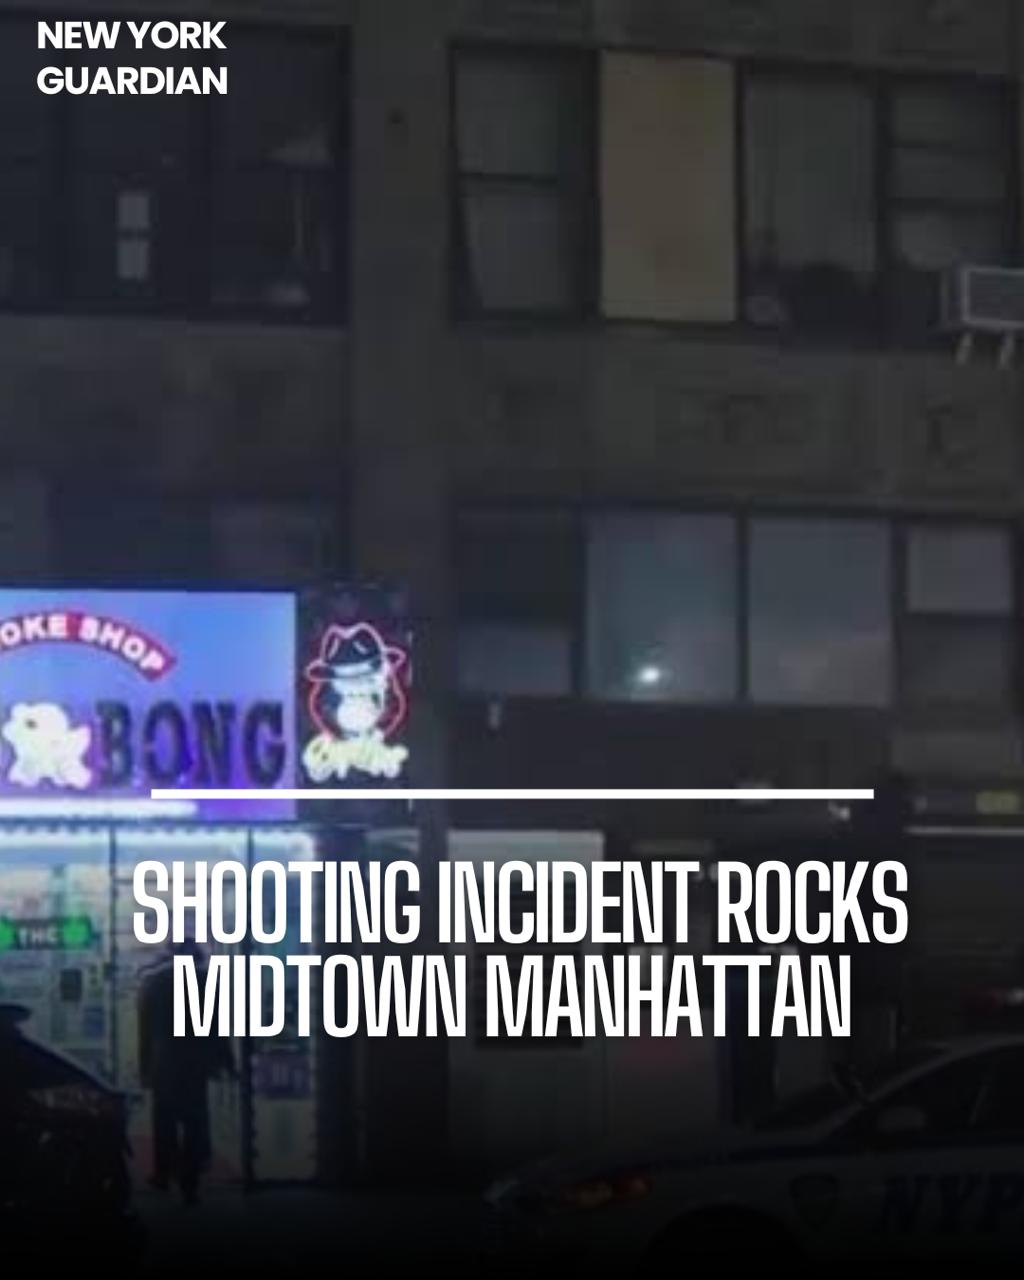 A guy was hit in the head inside a music studio overnight in Manhattan, cops say.